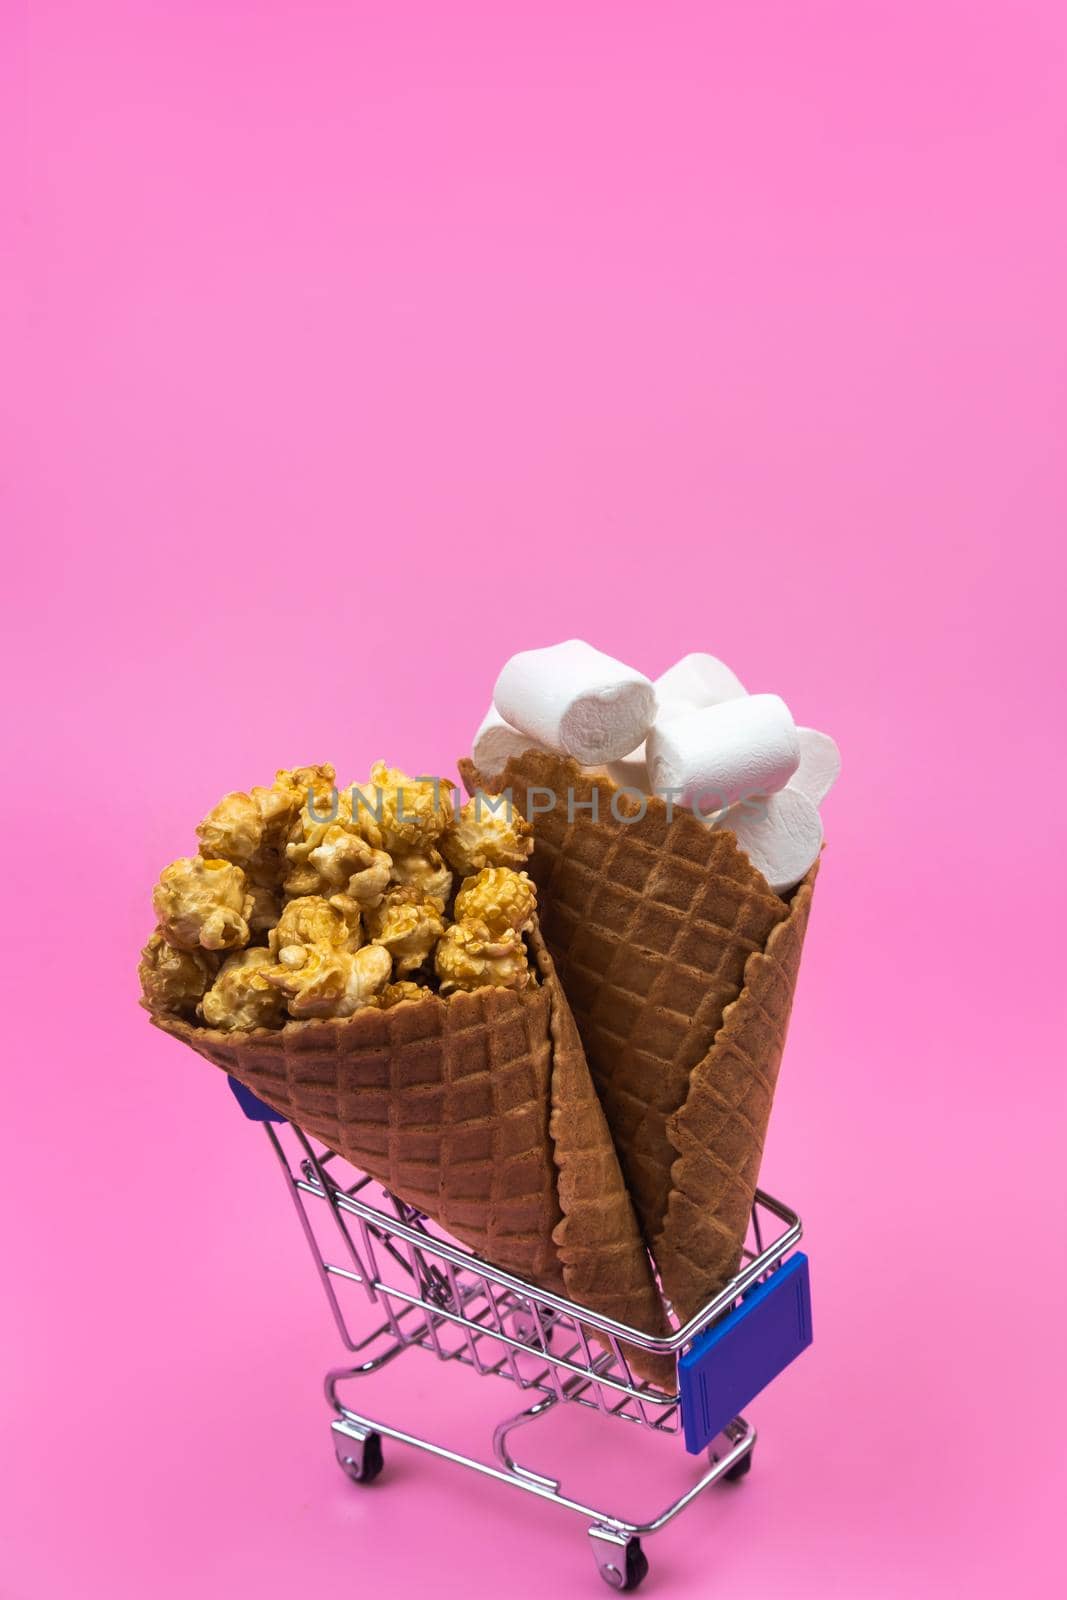 Shopping cart with ice cream cones with sweets on a pink background by Lobachad